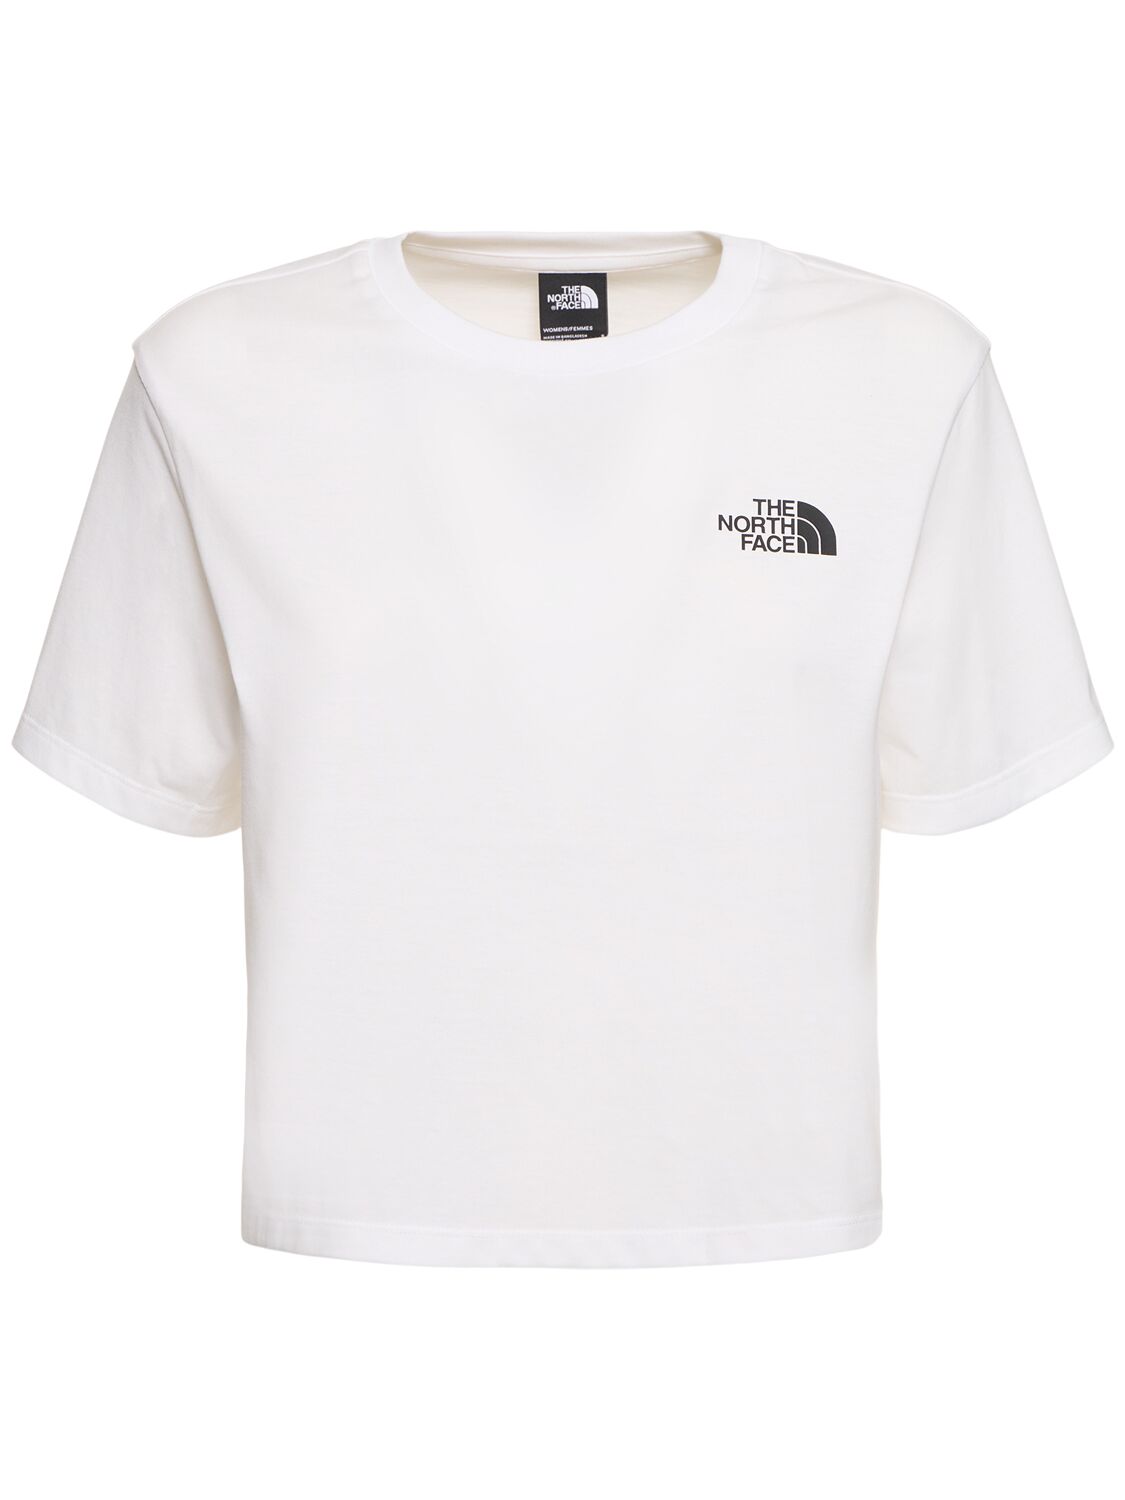 THE NORTH FACE SIMPLE DOME CROPPED T-SHIRT